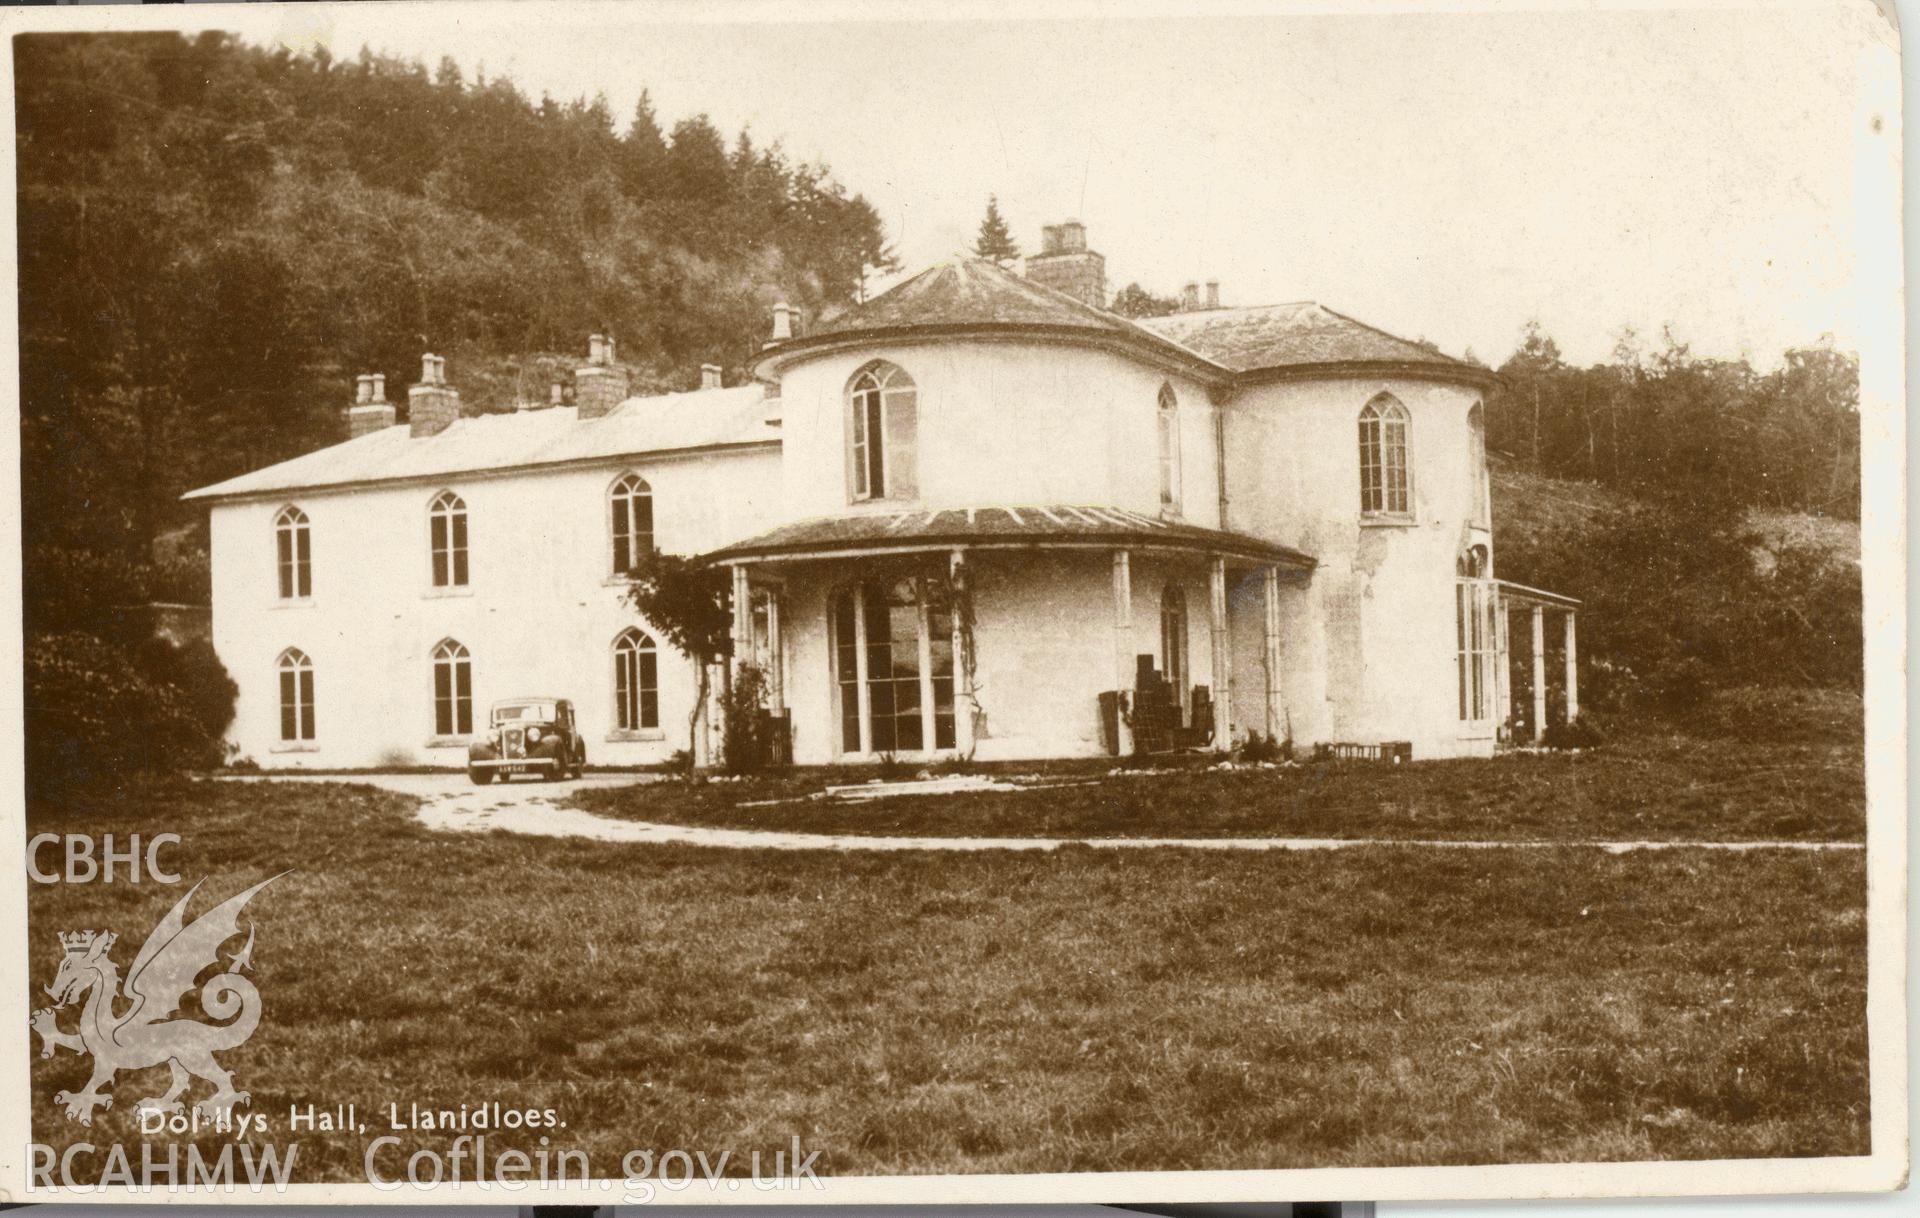 Digitised postcard image of Dollys Hall, Llanidloes. Produced by Parks and Gardens Data Services, from an original item in the Peter Davis Collection at Parks and Gardens UK. We hold only web-resolution images of this collection, suitable for viewing on screen and for research purposes only. We do not hold the original images, or publication quality scans.